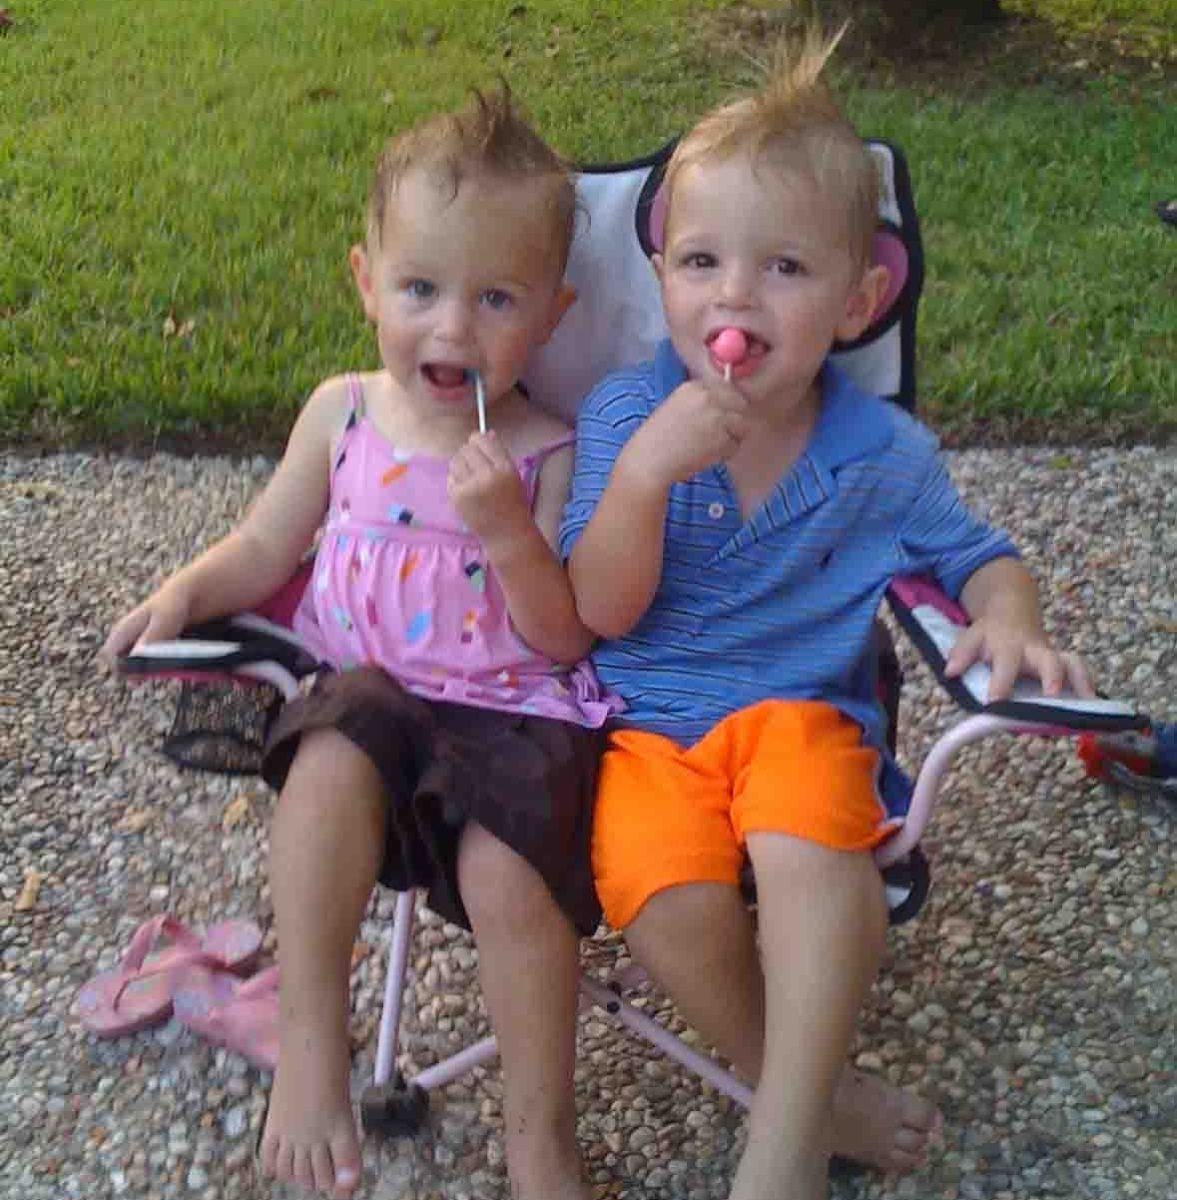 Canaan+and+Sloane+Factor+26+enjoying+lollipops+and+mohawks+together.